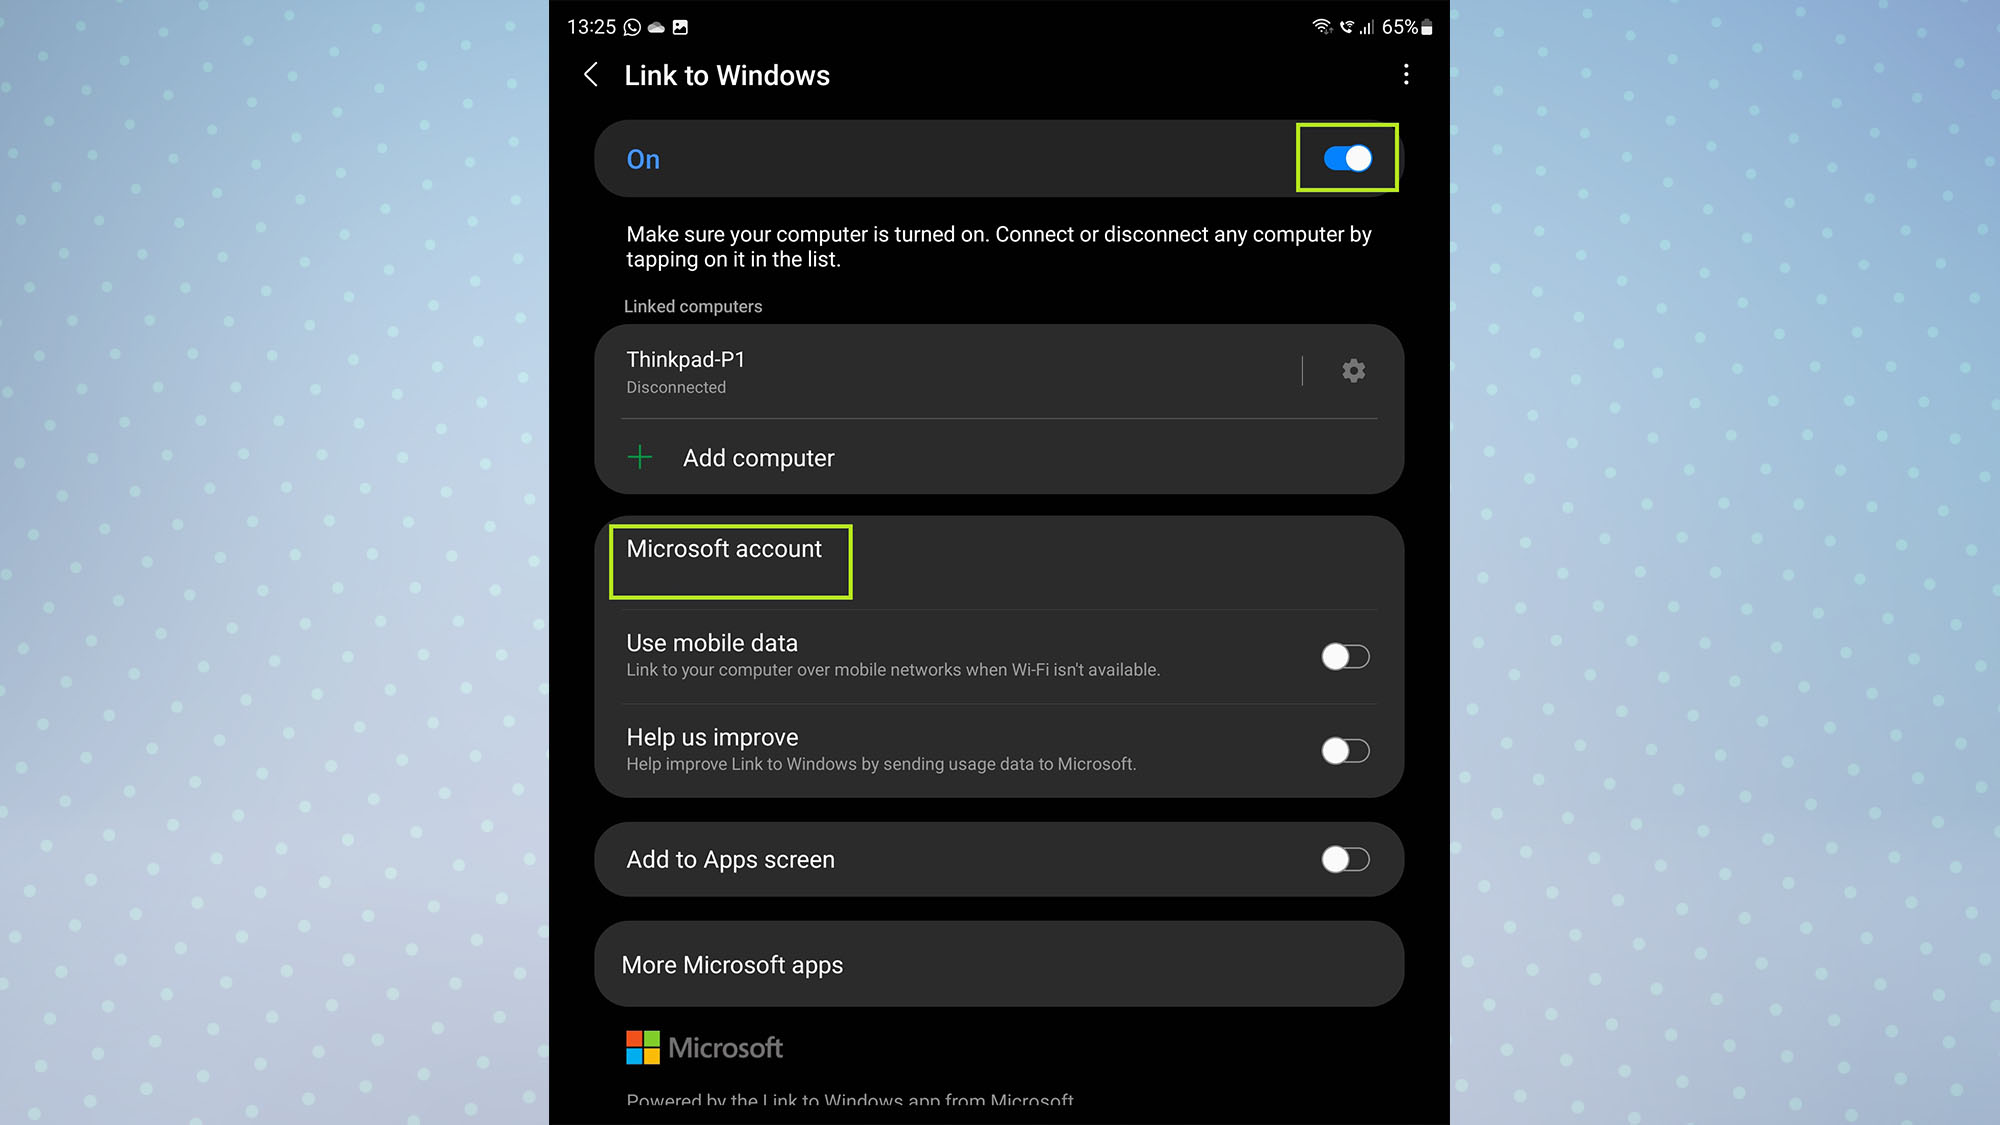 Samsung Link to Windows settings page, which shows the power key and your premium Microsoft account